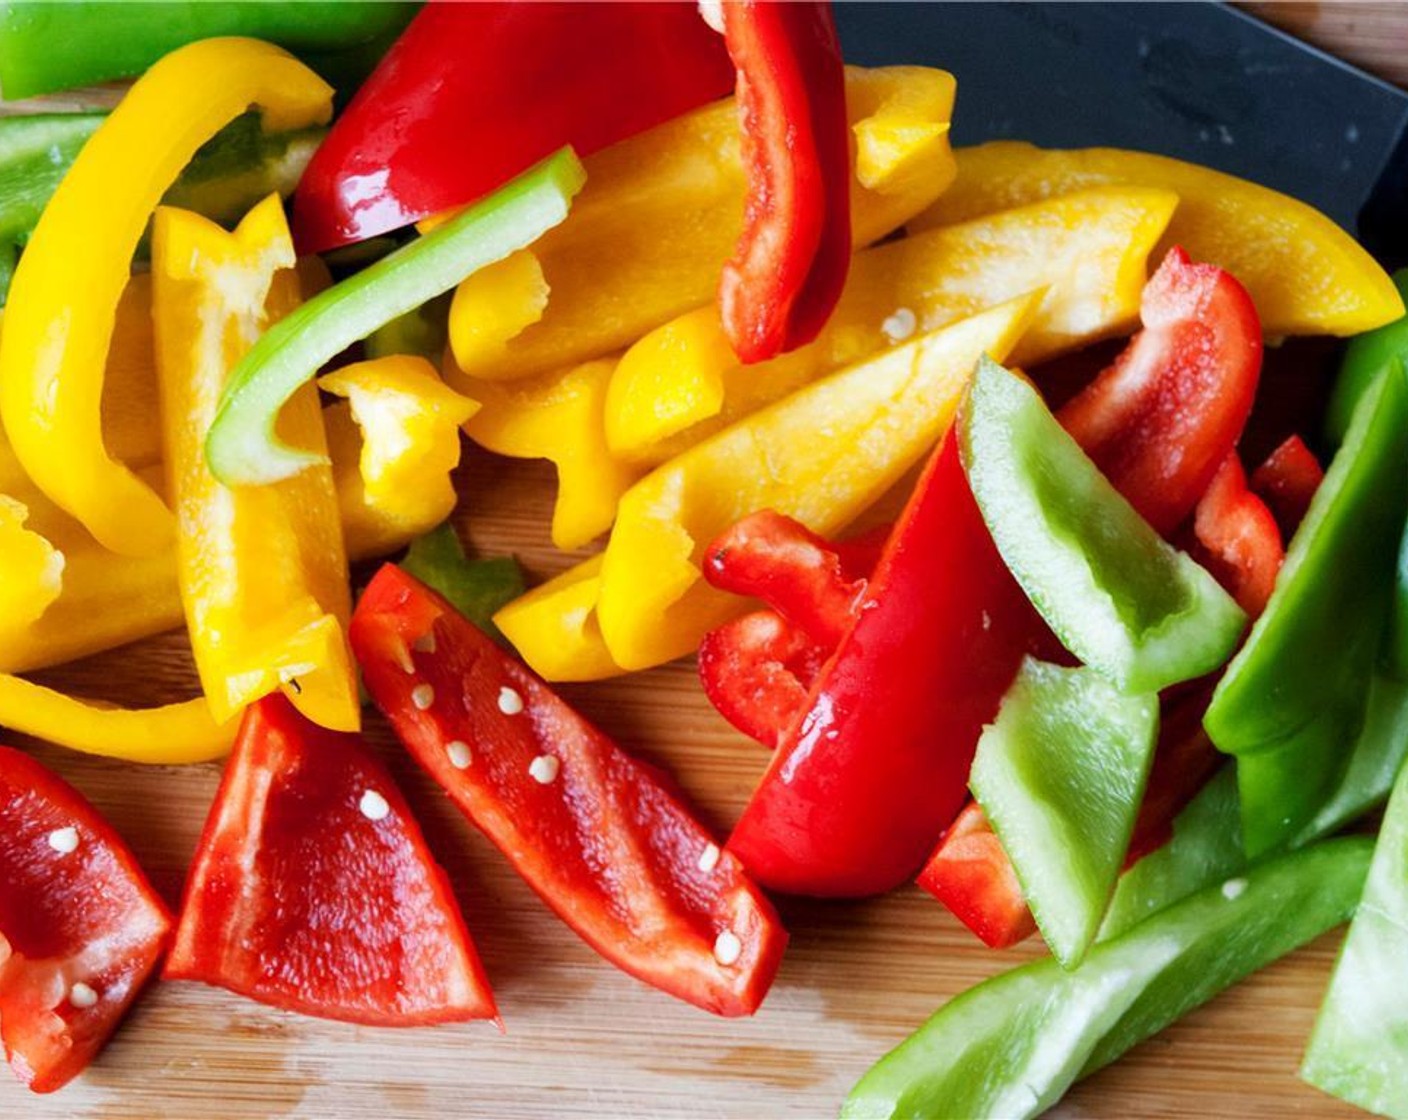 step 3 Wash and slice the Green Bell Peppers (2), Red Bell Peppers (2), and Yellow Bell Peppers (2).